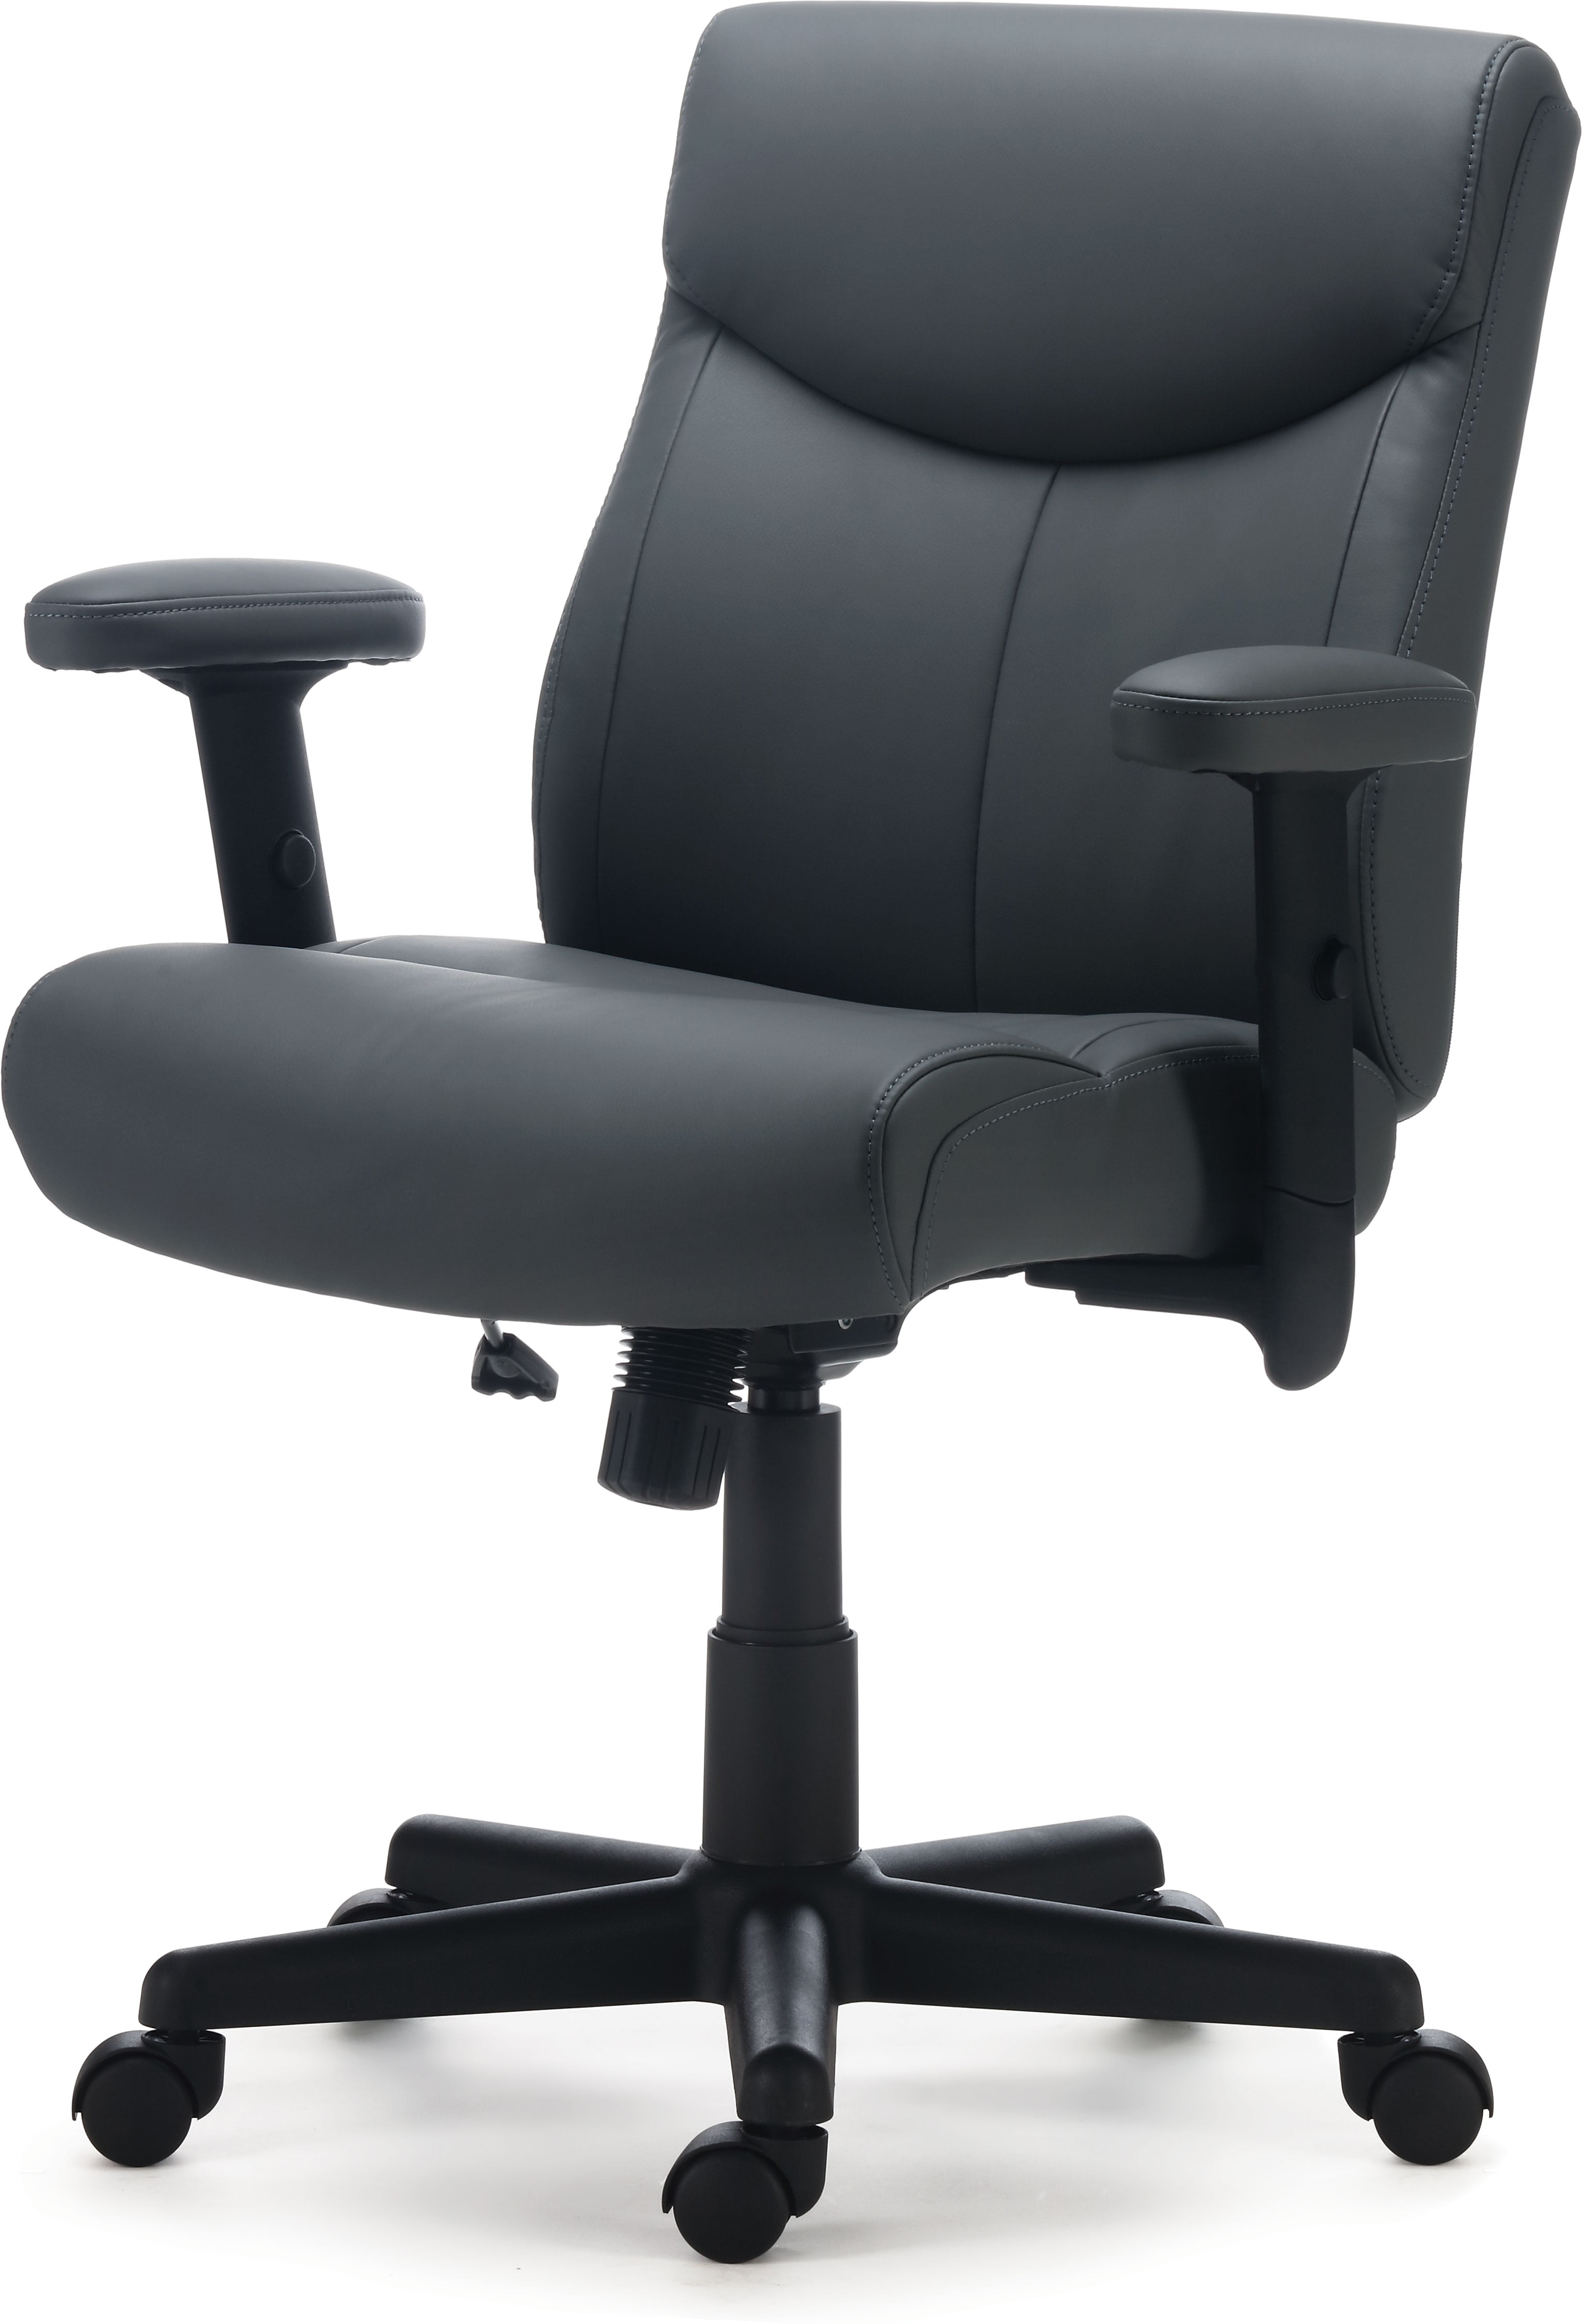 Staples Traymore Luxura Managers Chair Gray (53246 ...